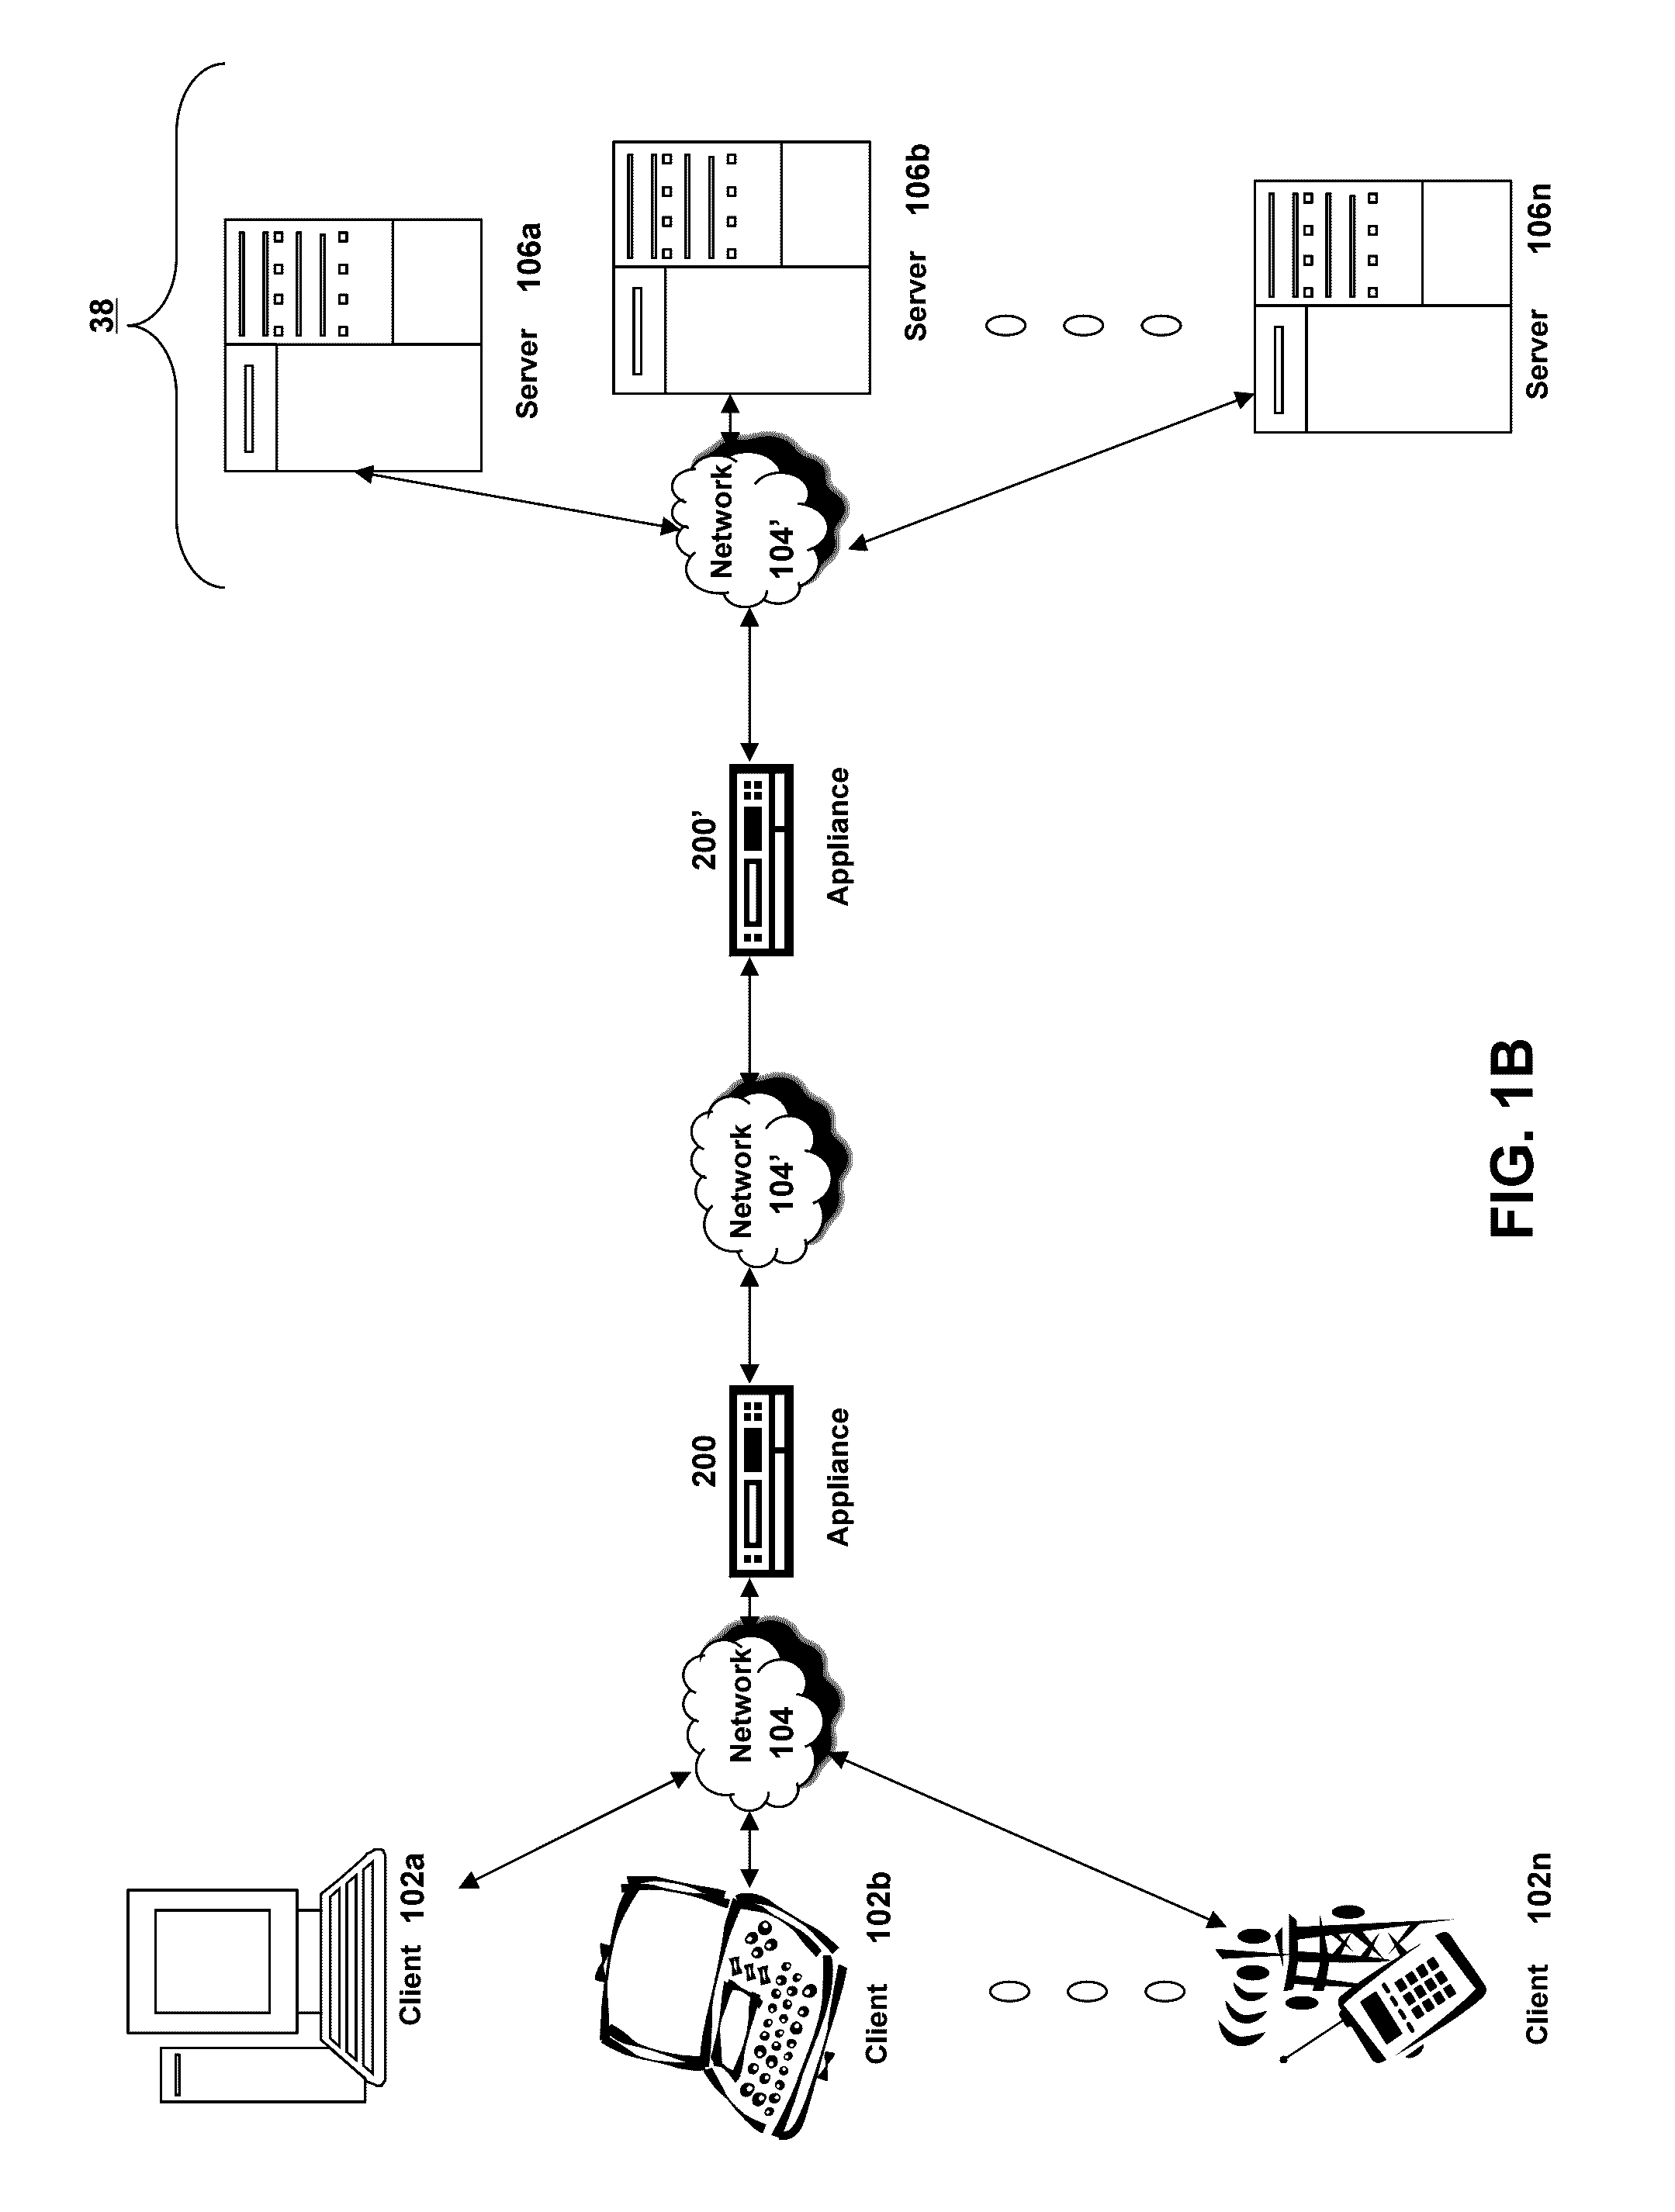 Systems and methods for configuring a device via a software-defined networking controller